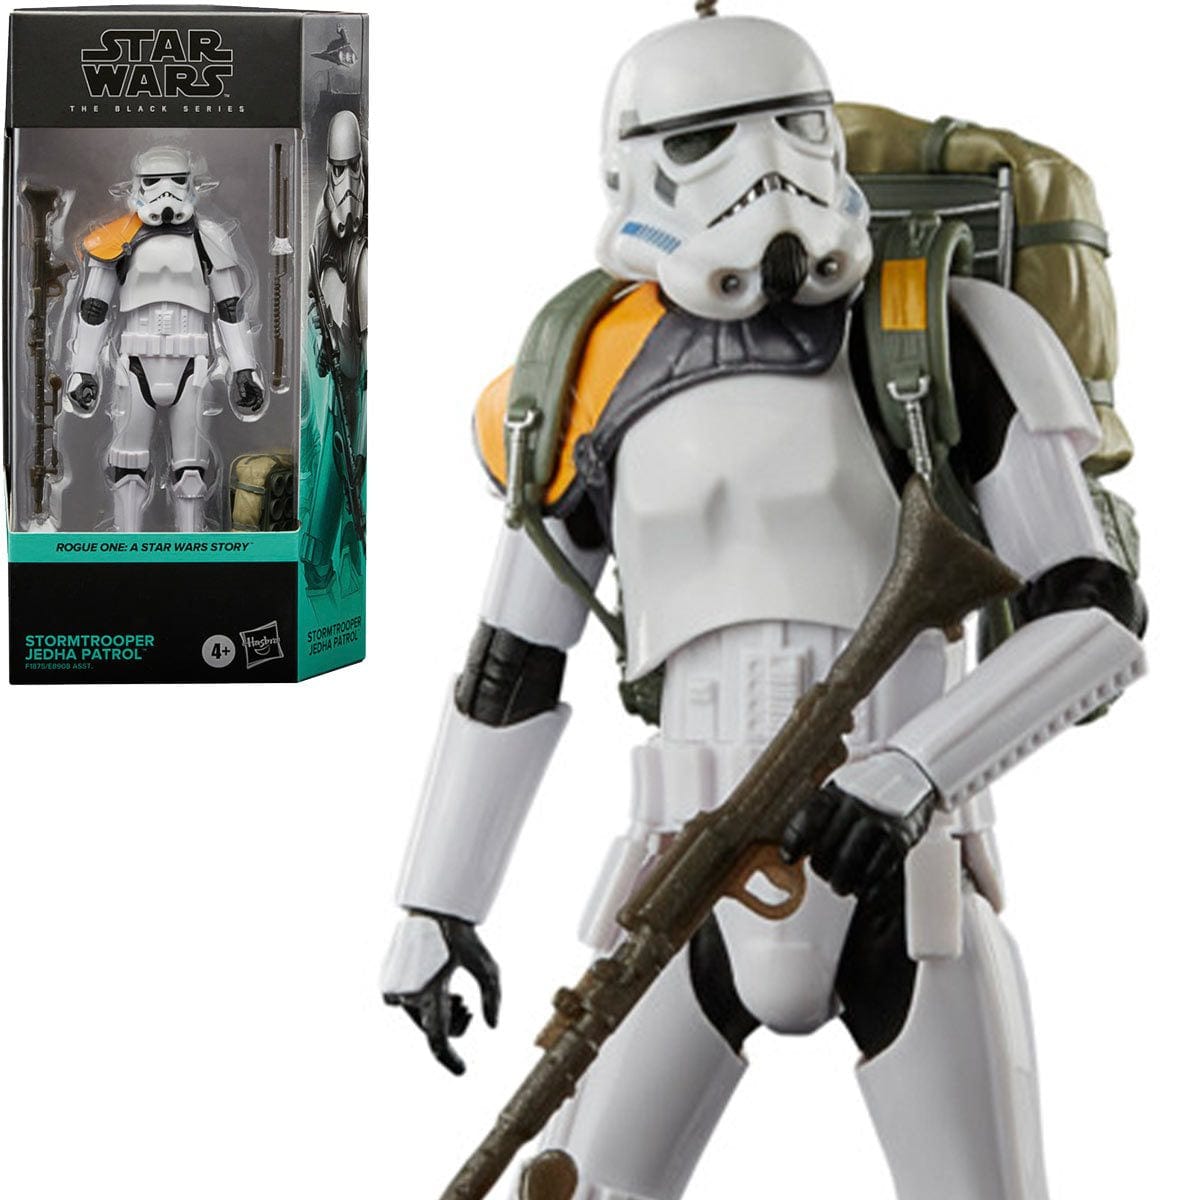 Star Wars The Black Series Stormtrooper Jedha Patrol 6-Inch Action Figure with box and action figure